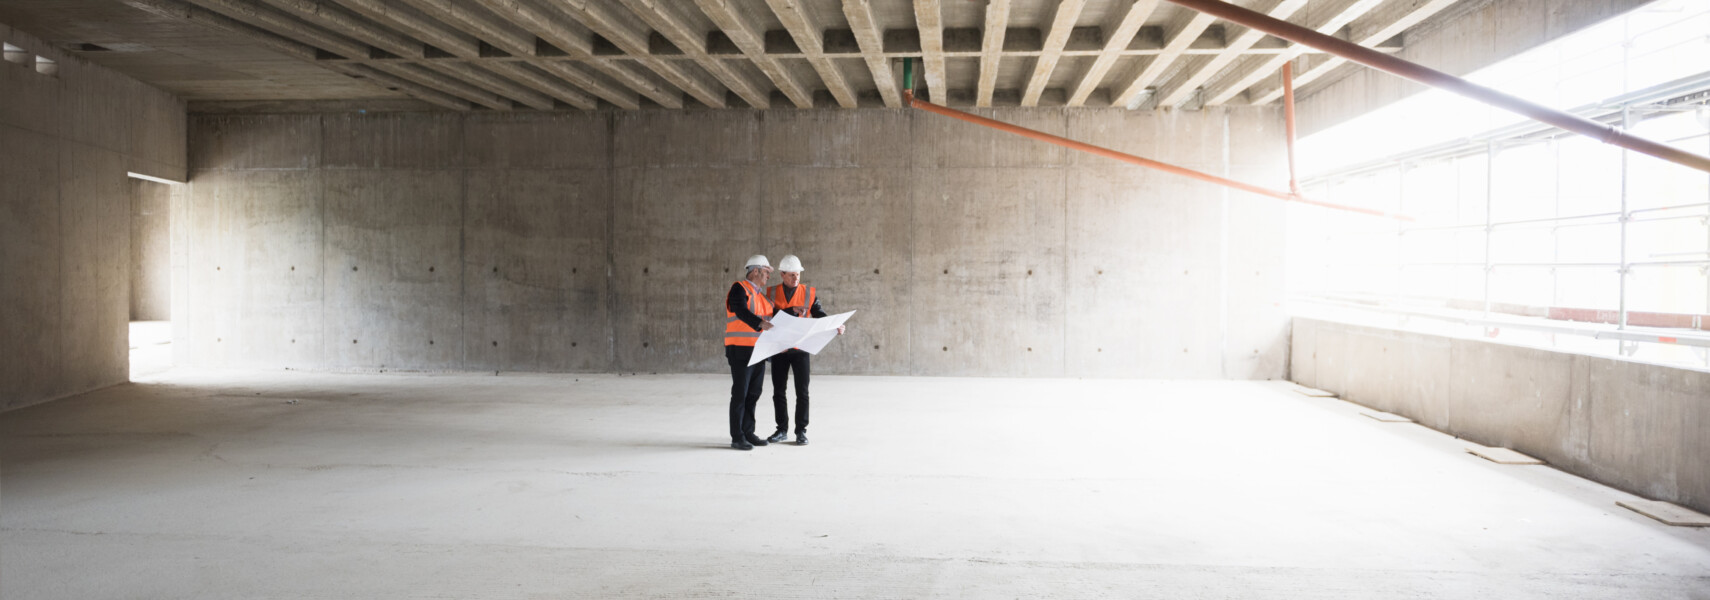 Two Men With Plan Wearing Safety Vests Talking In Building Under Construction